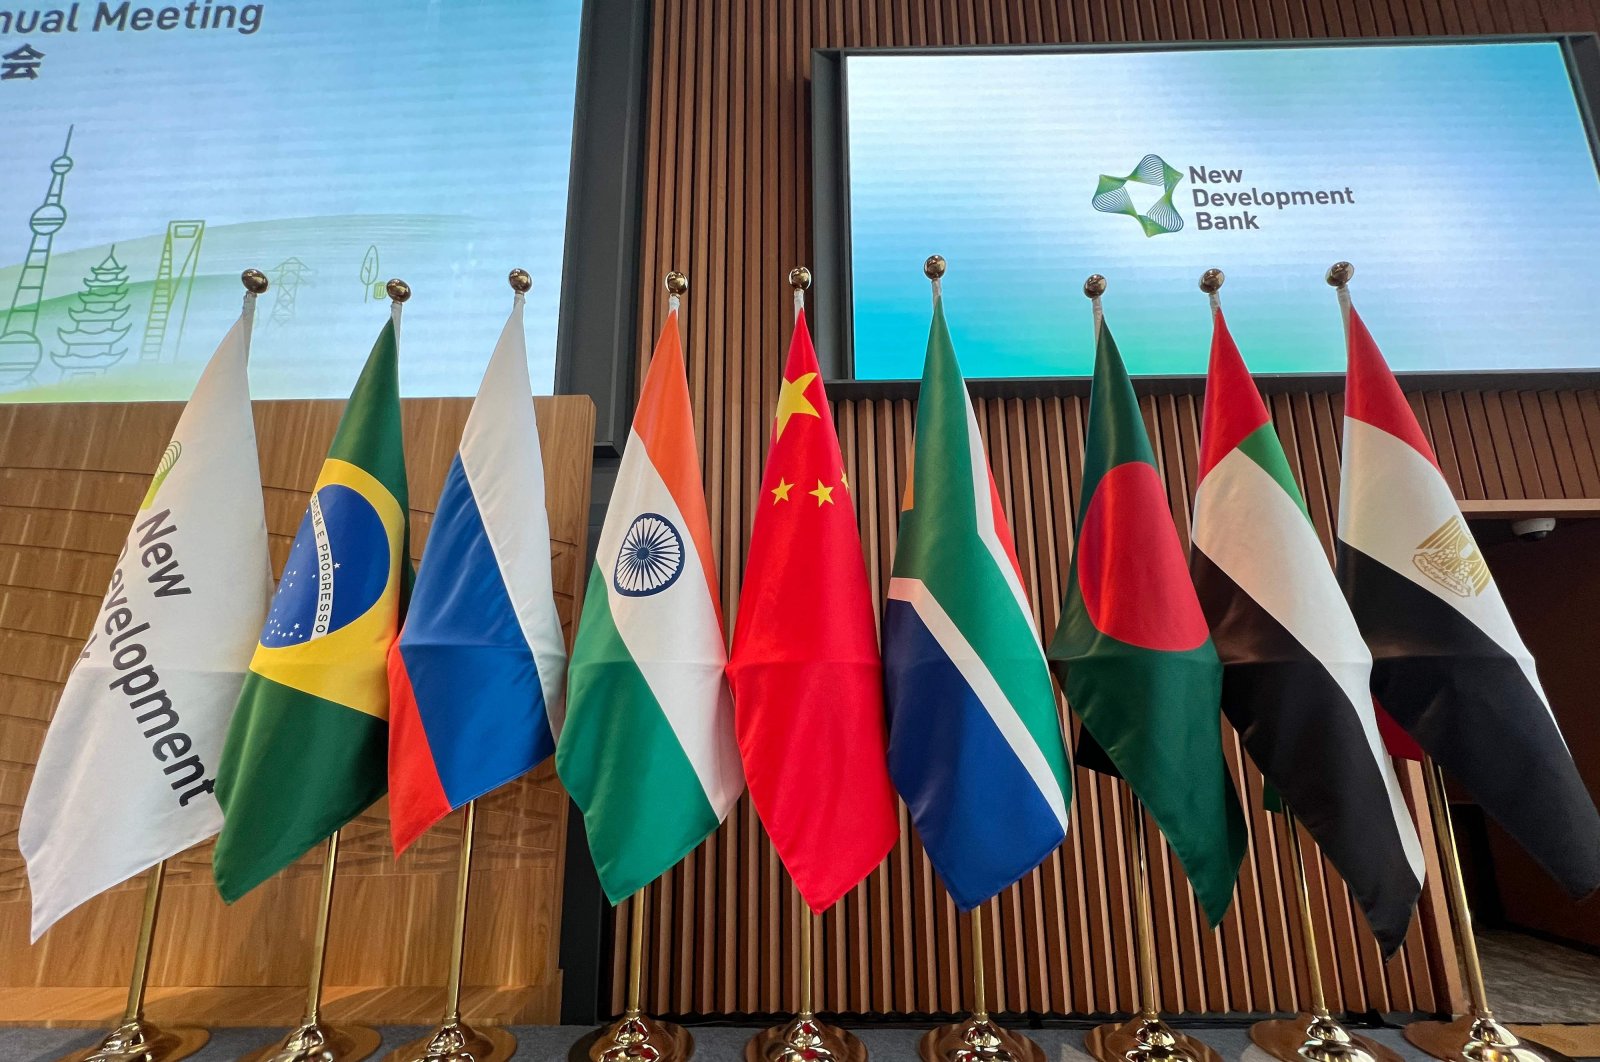 Flags are seen displayed at the opening ceremony of the New Development Bank (NDB) 8th Annual Meeting in Shanghai, China, May 30, 2023. (AFP Photo)